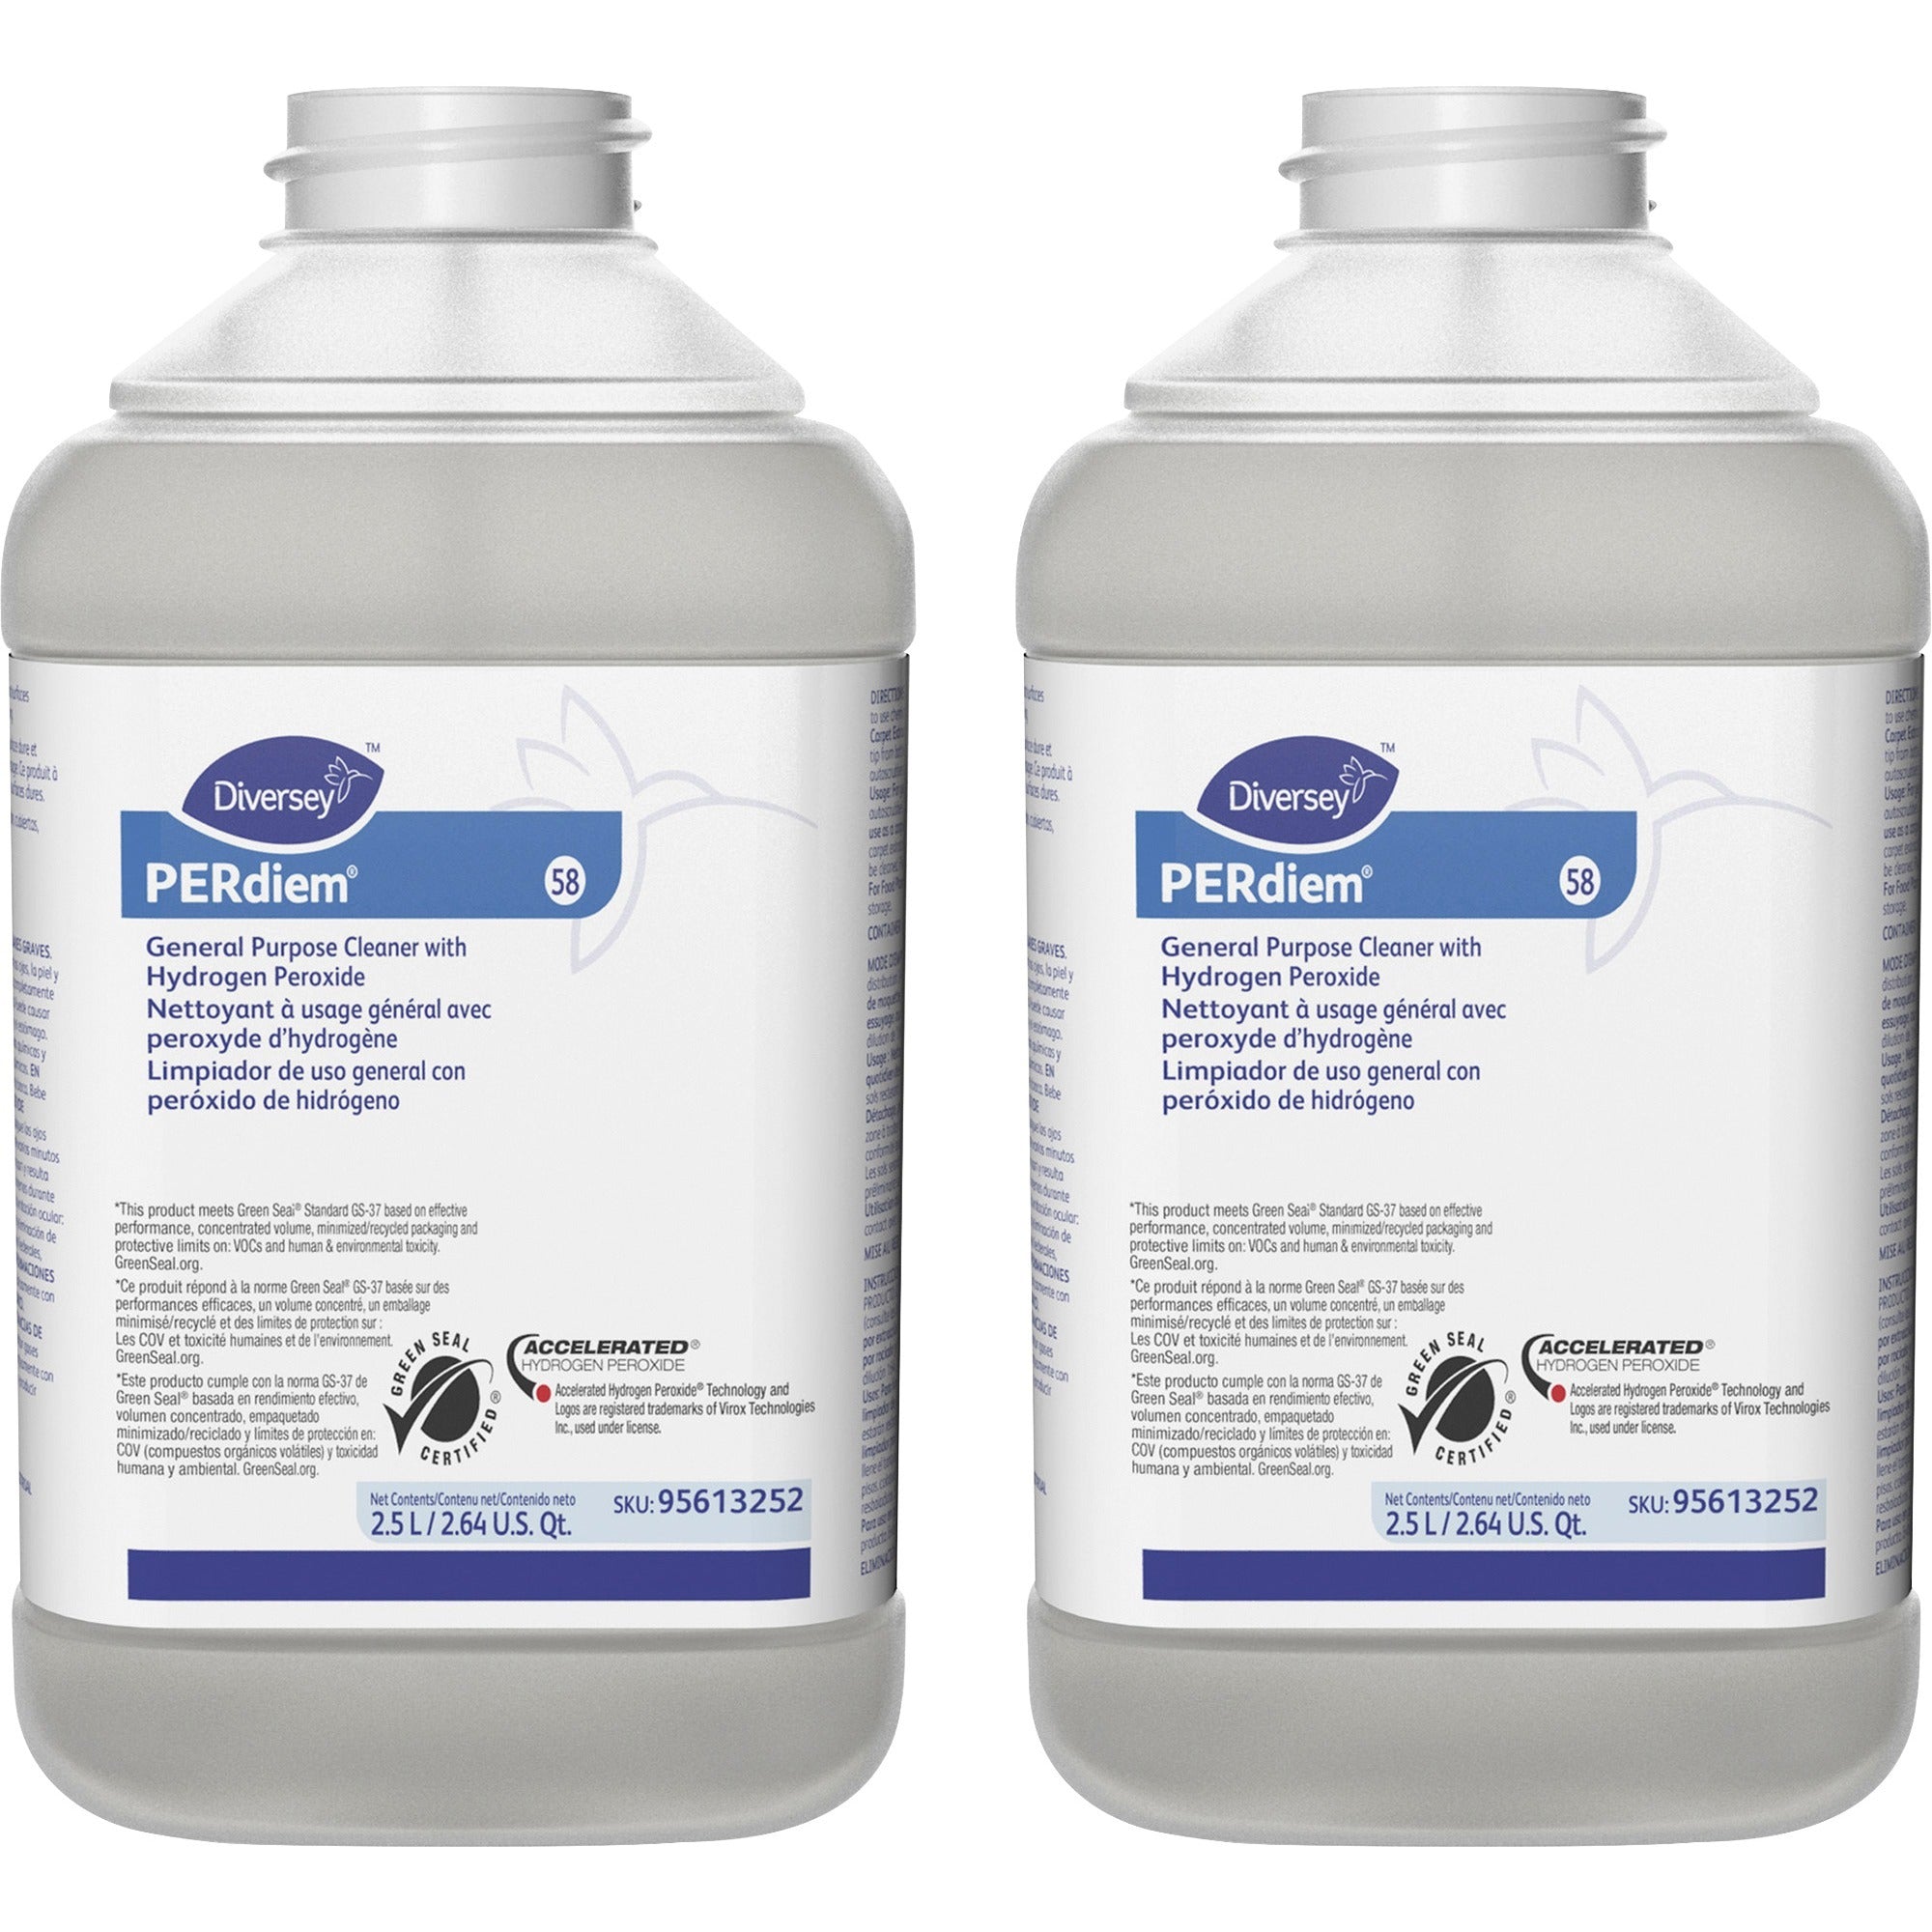 perdiem-general-purpose-cleaner-with-hydrogen-peroxide-concentrate-845-fl-oz-26-quartbottle-2-carton-heavy-duty-dilutable-phosphorous-free-odorless-color-free-dye-free-fragrance-free-kosher-clear_dvo95613252ct - 1